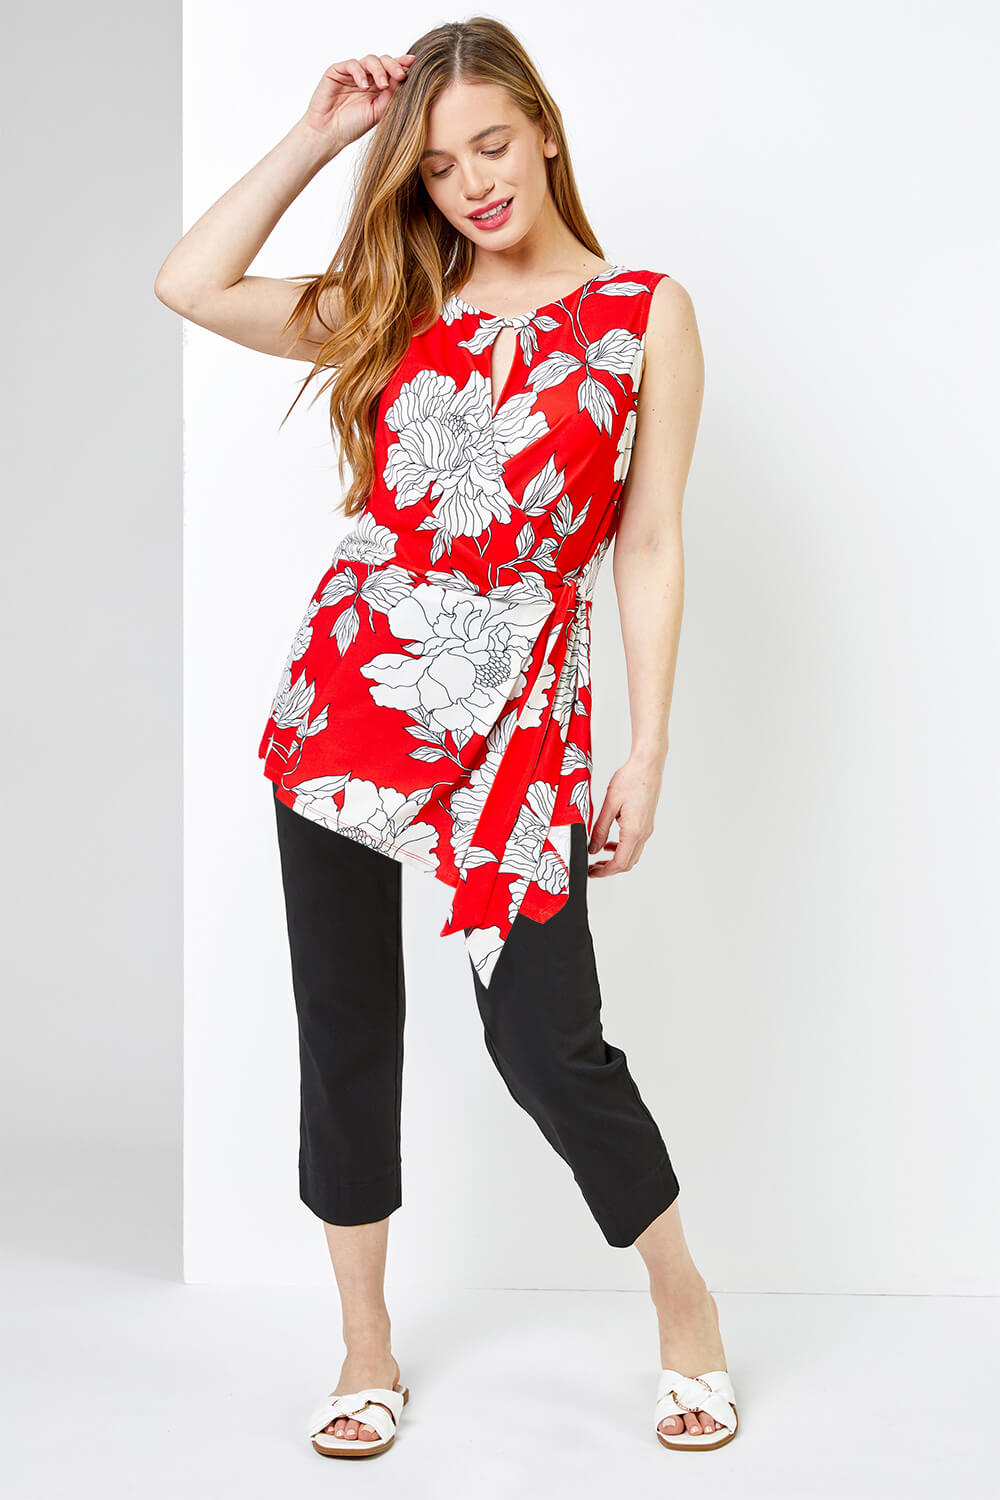 Red Petite Floral Print Asymmetric Top, Image 3 of 4